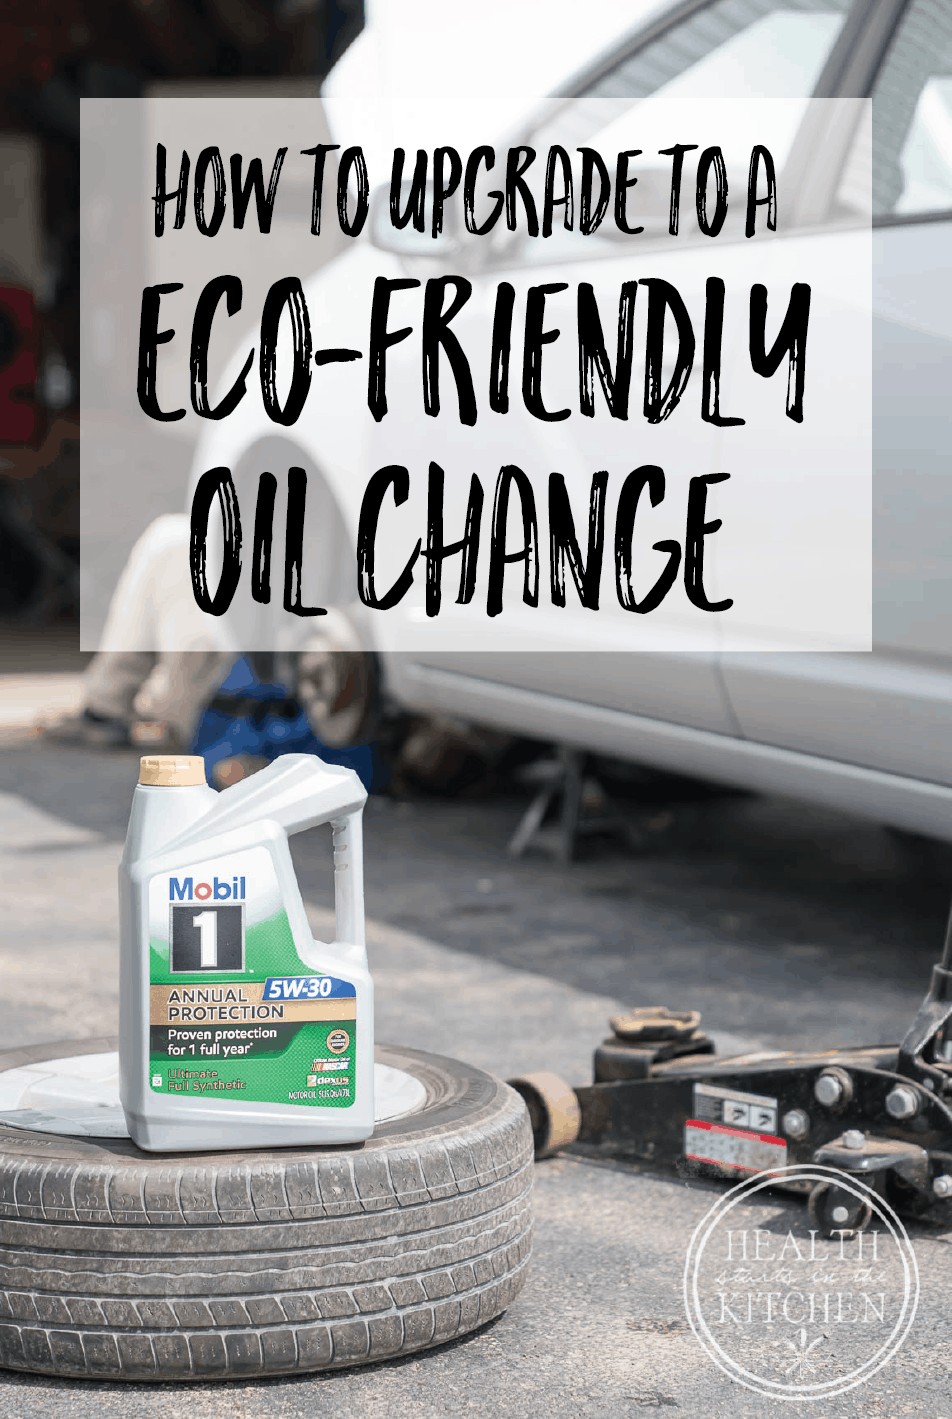 Upgrade to a Eco-Friendly Automobile Oil Change